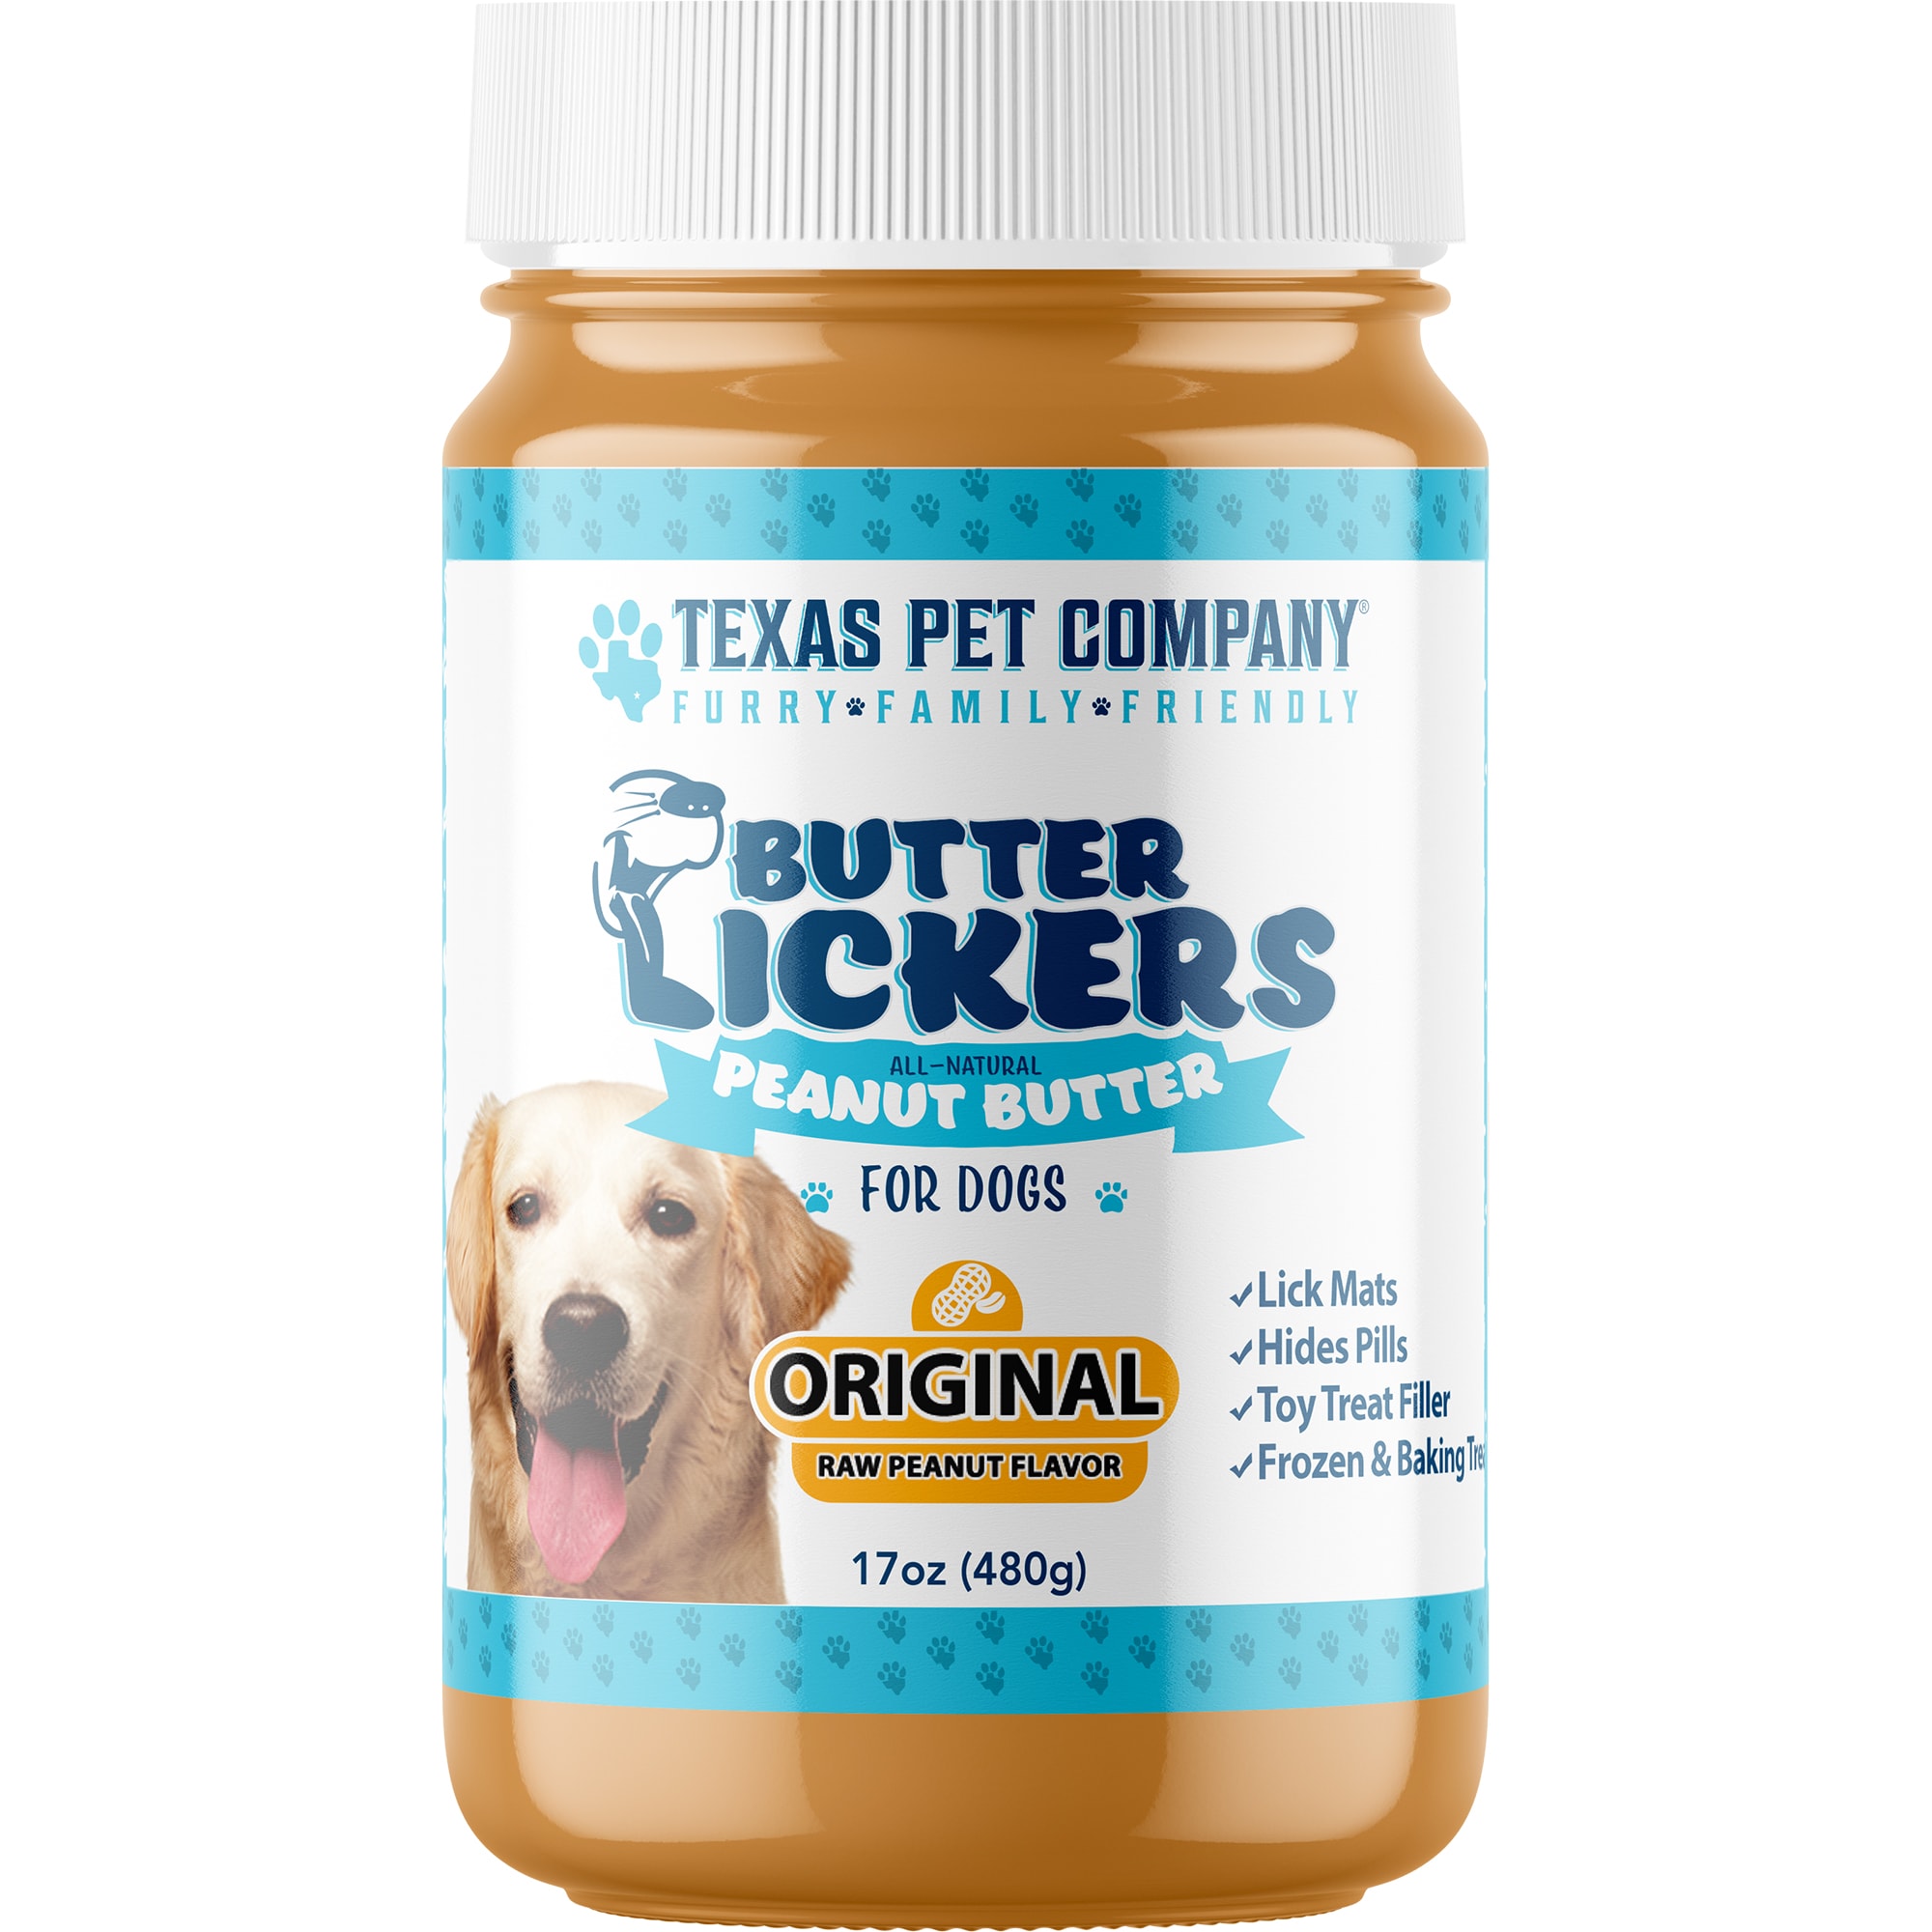 Butter Lickers Peanut Butter For Dogs – Original Raw Peanut Butter » Texas  Pet Company